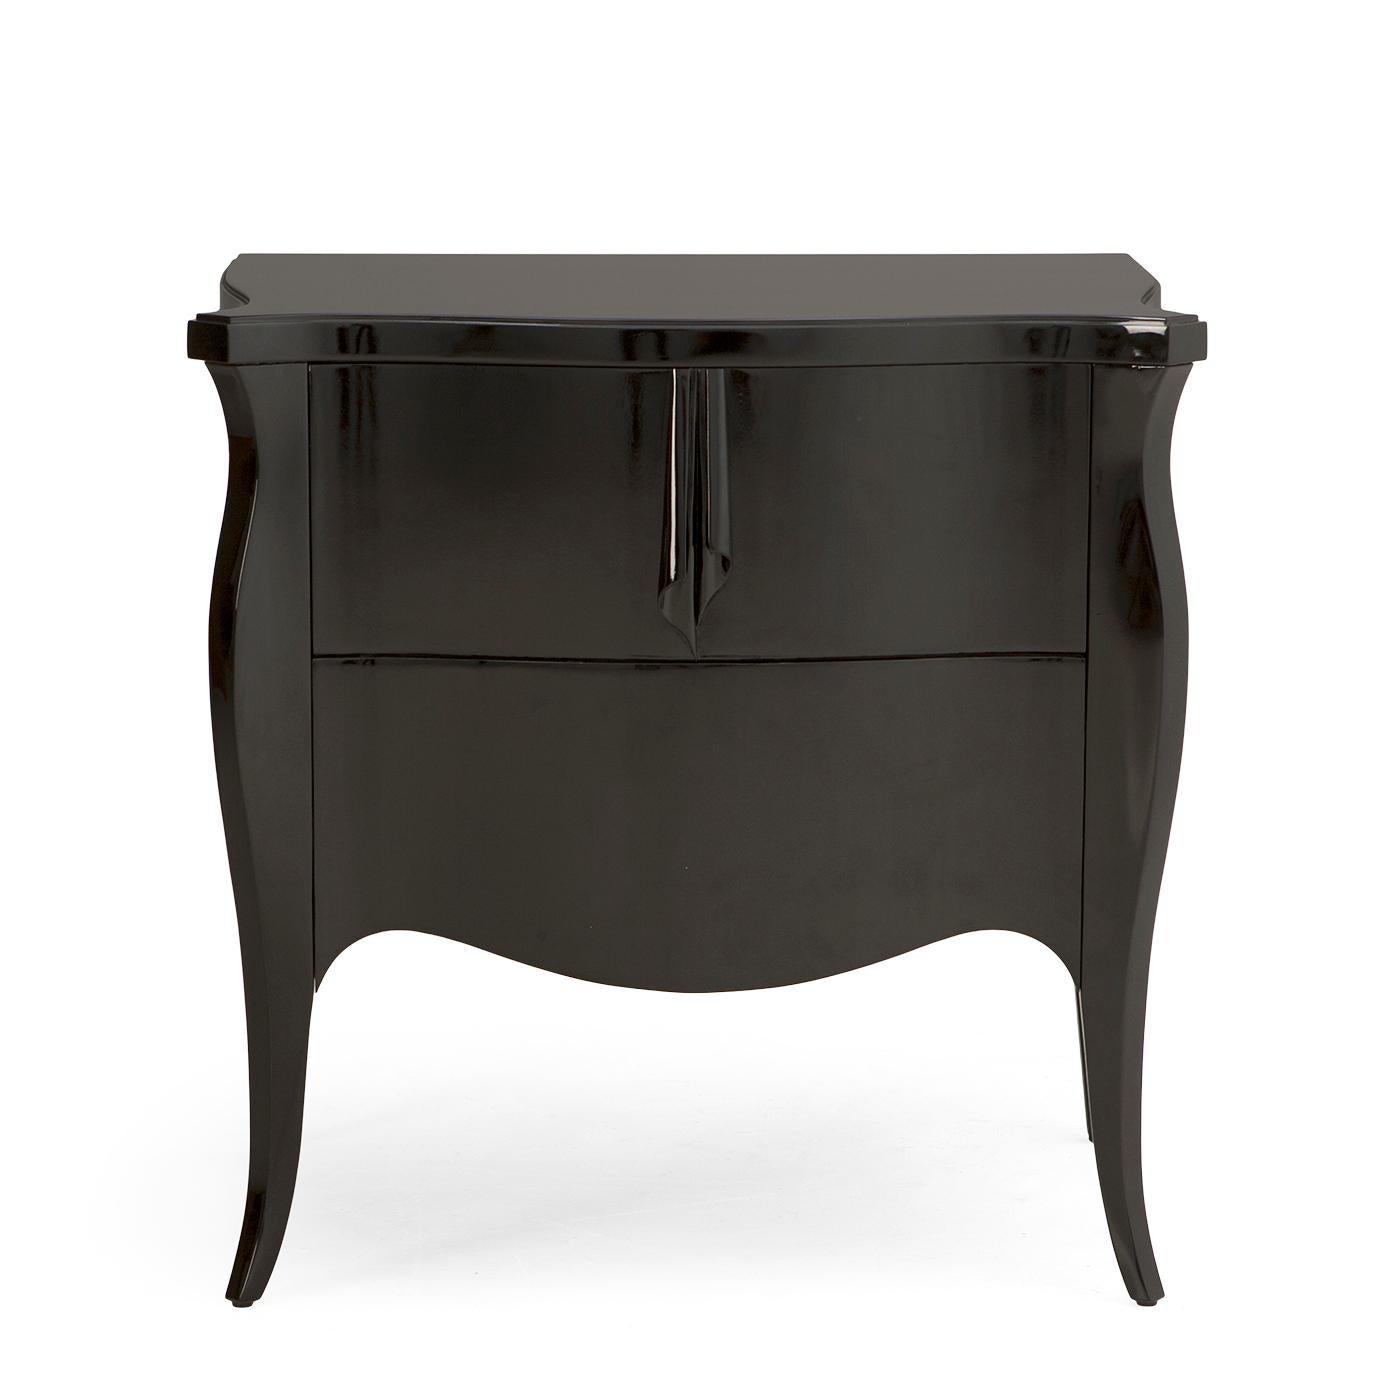 Nightstand or side table drapes with structure
in solid mahogany wood, hand carved wood in
black lacquered finish. Includes 2 drawers with
ultra suede lining inside and drawer with easy glide
system.
Also available in white lacquered or in